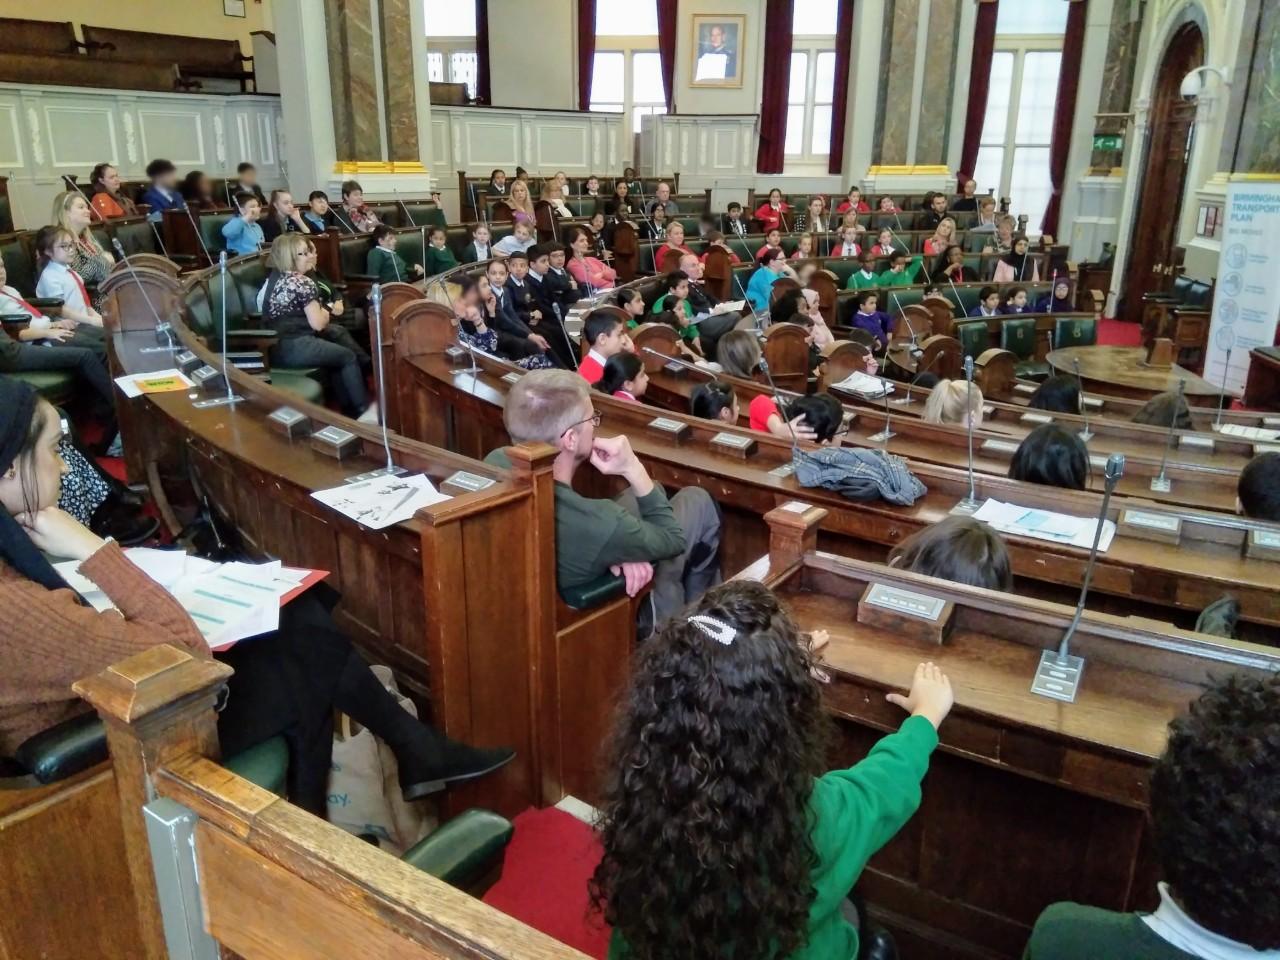 Children in Council Chamber